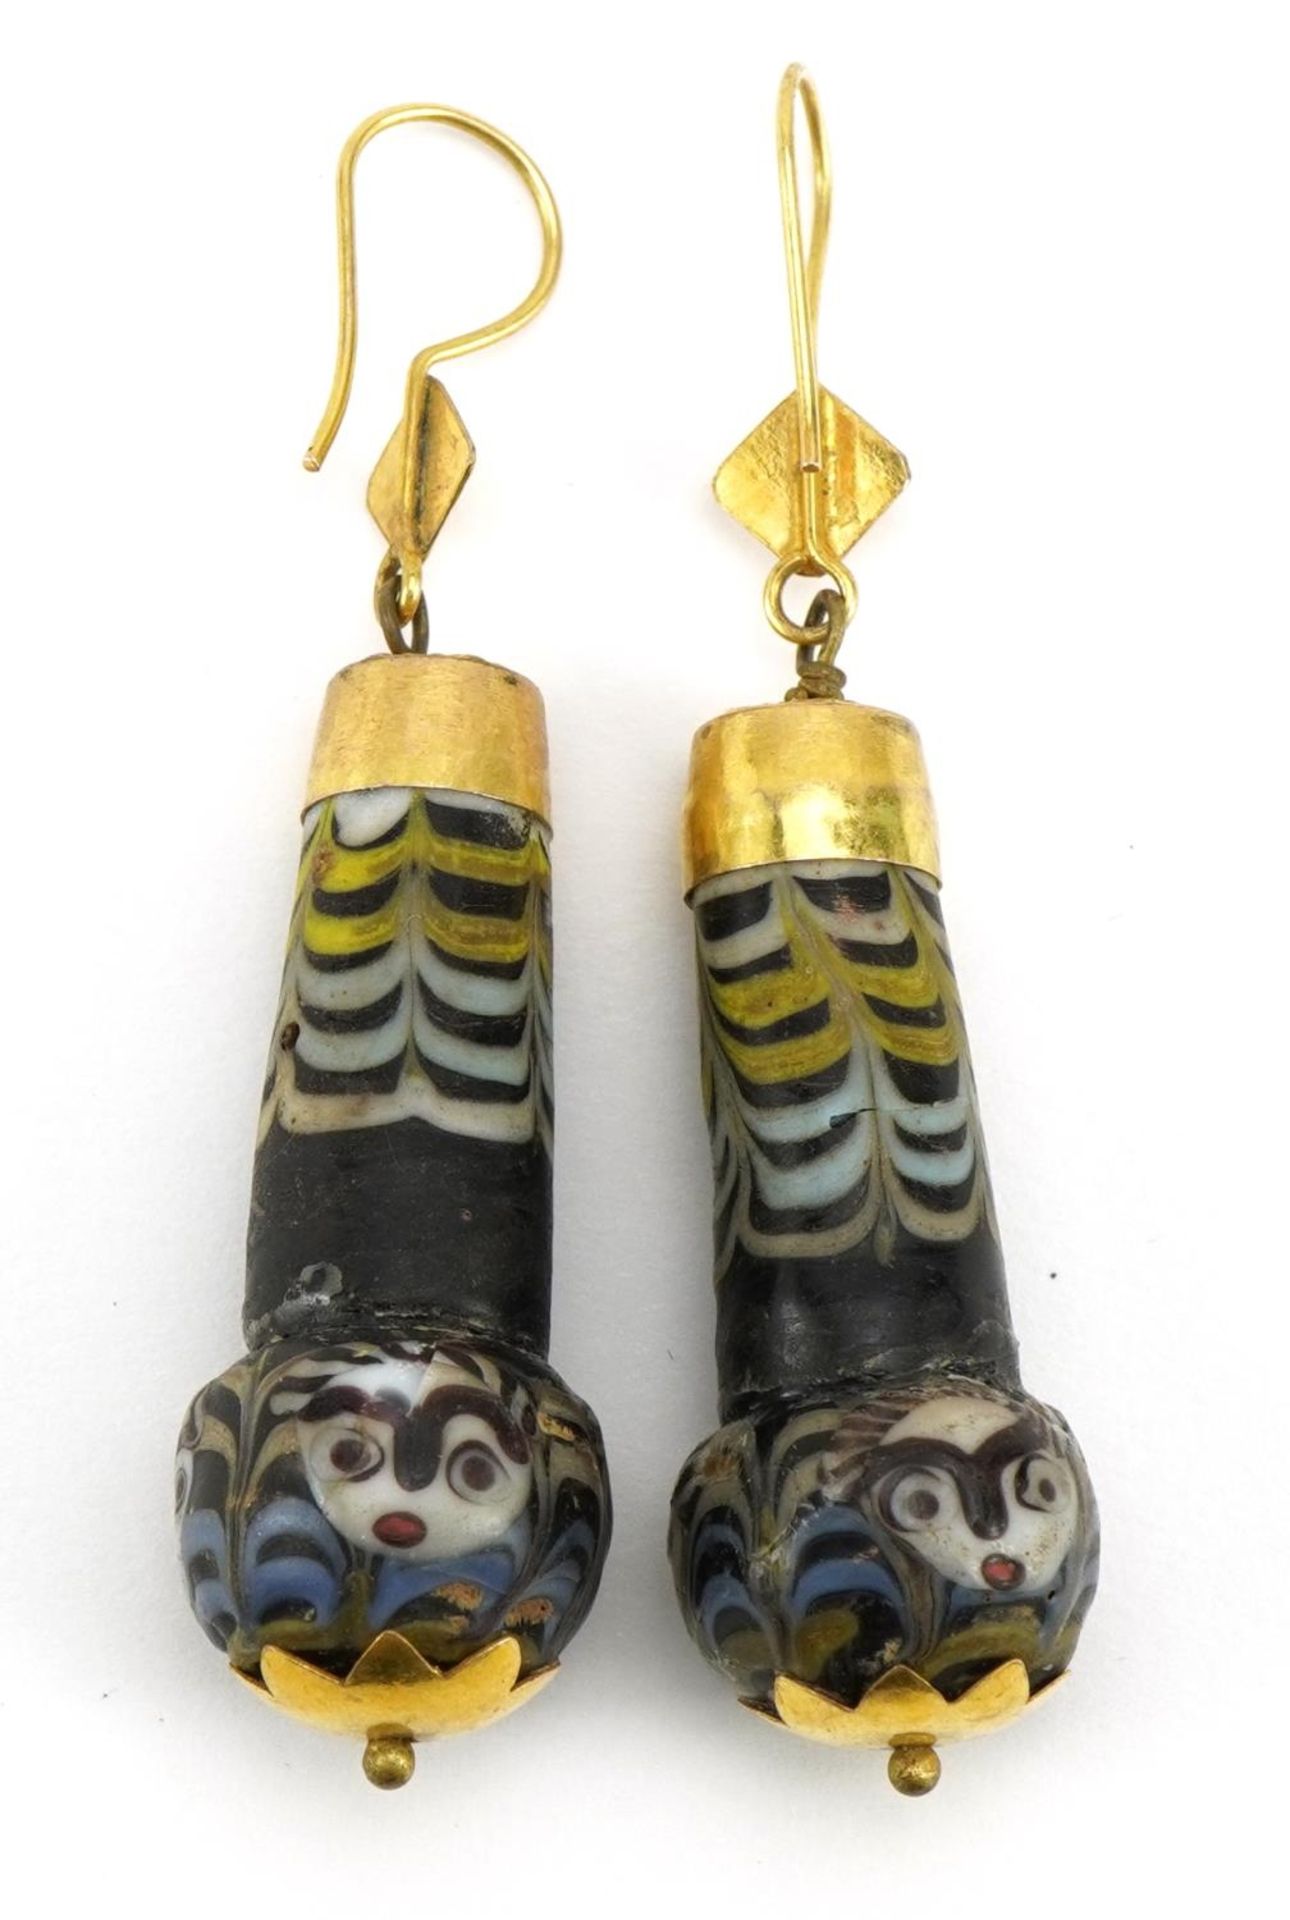 Pair of unmarked gold Islamic glass bead drop earrings, 6cm high, 15.6g : For further information on - Bild 2 aus 2